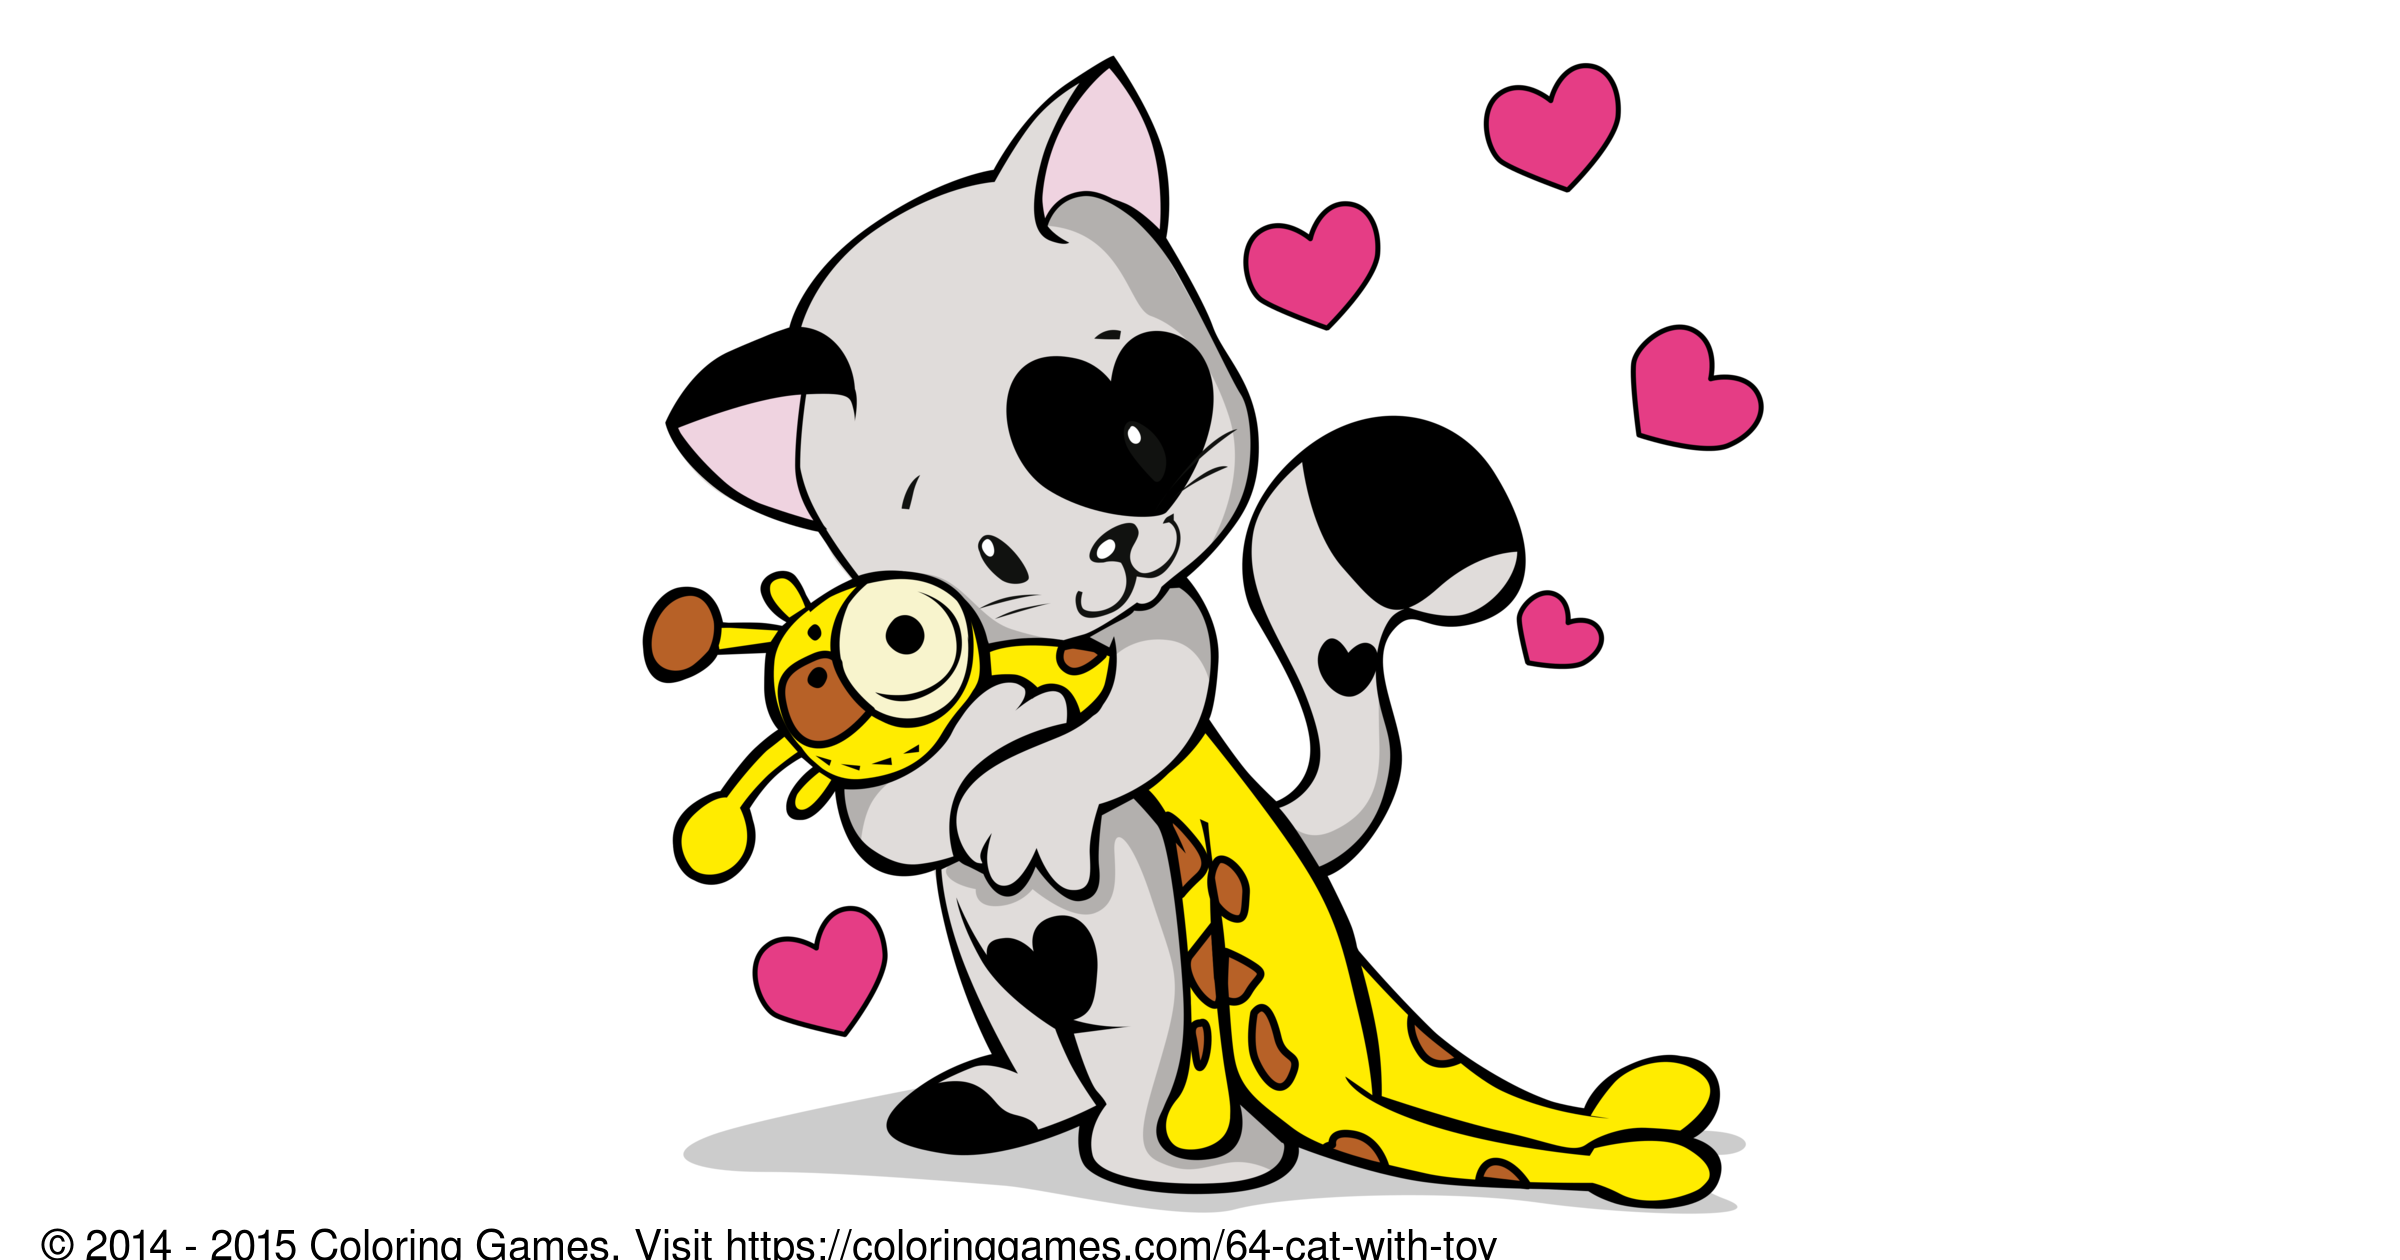 Download Cat with toy - Coloring Games and Coloring Pages